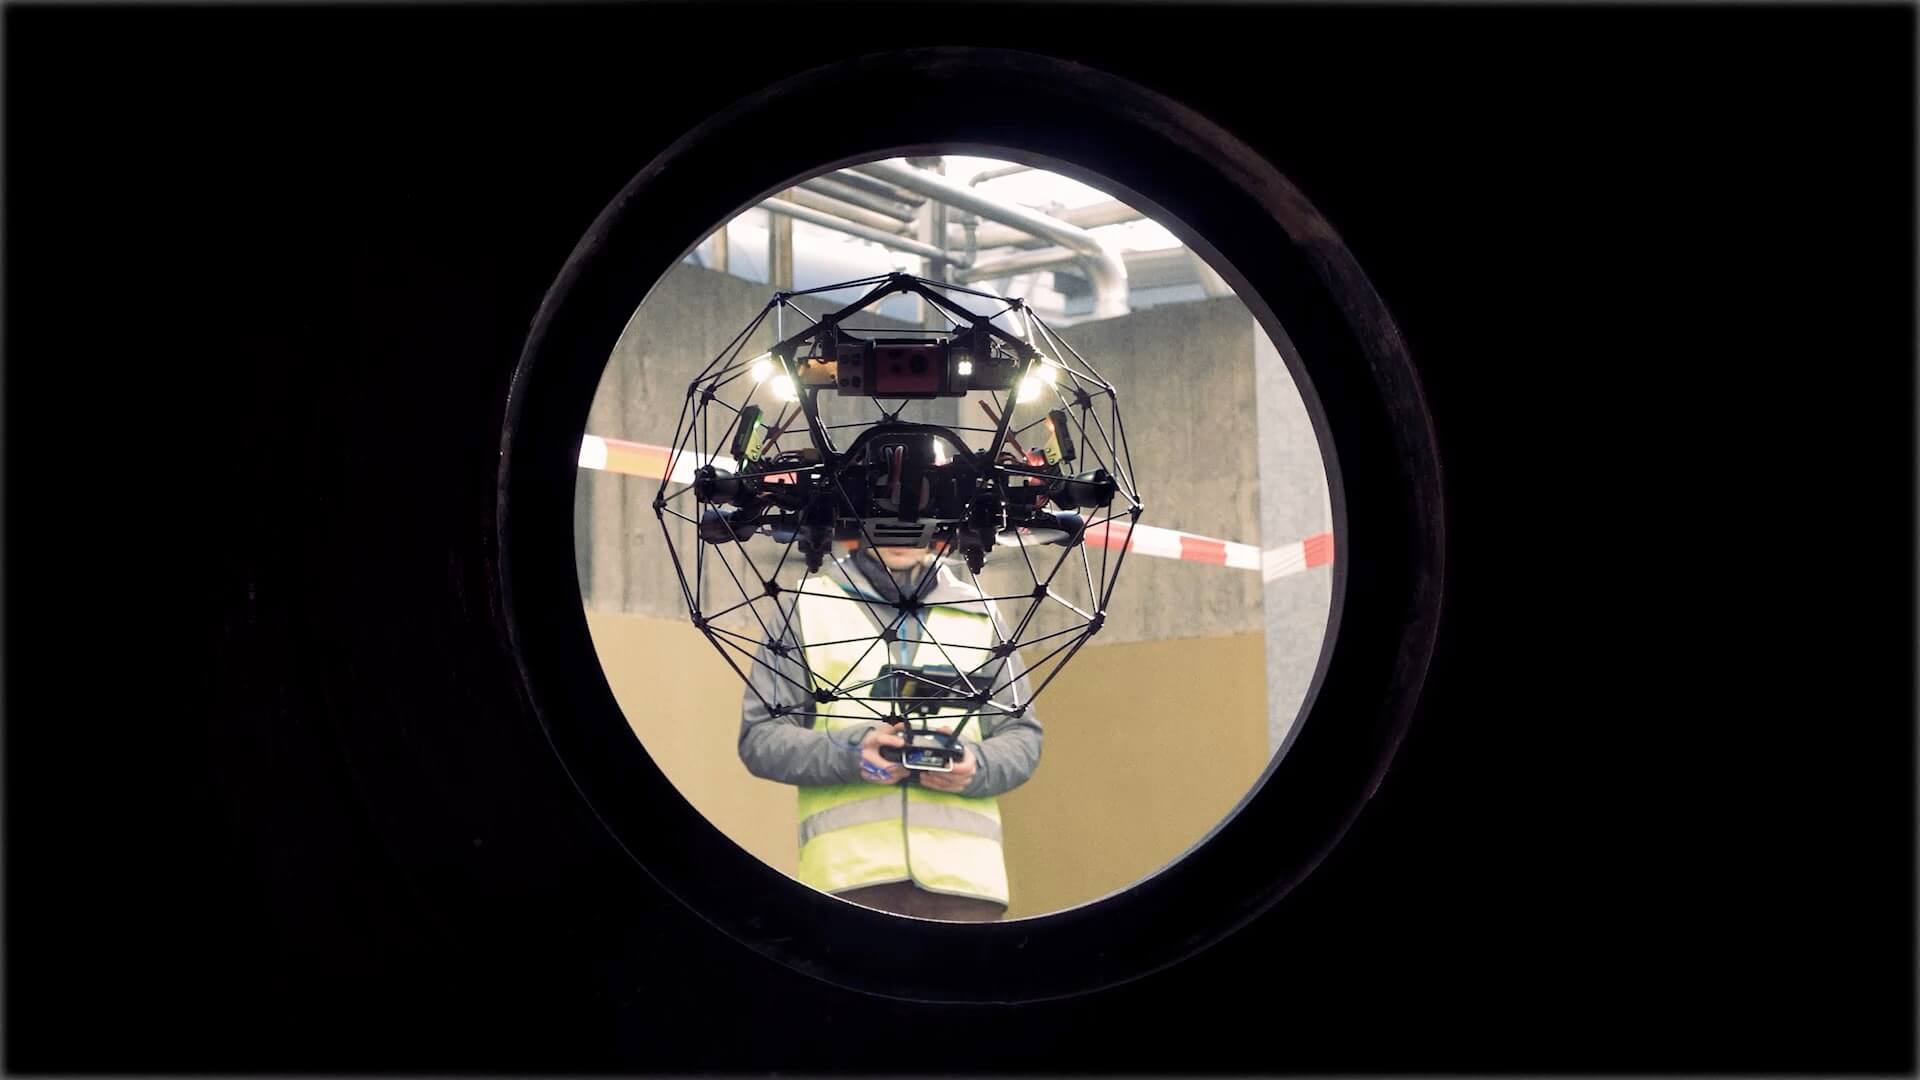 Inspect & Explore: Confined Space Drone Inspections with Elios 2 Drone Technology